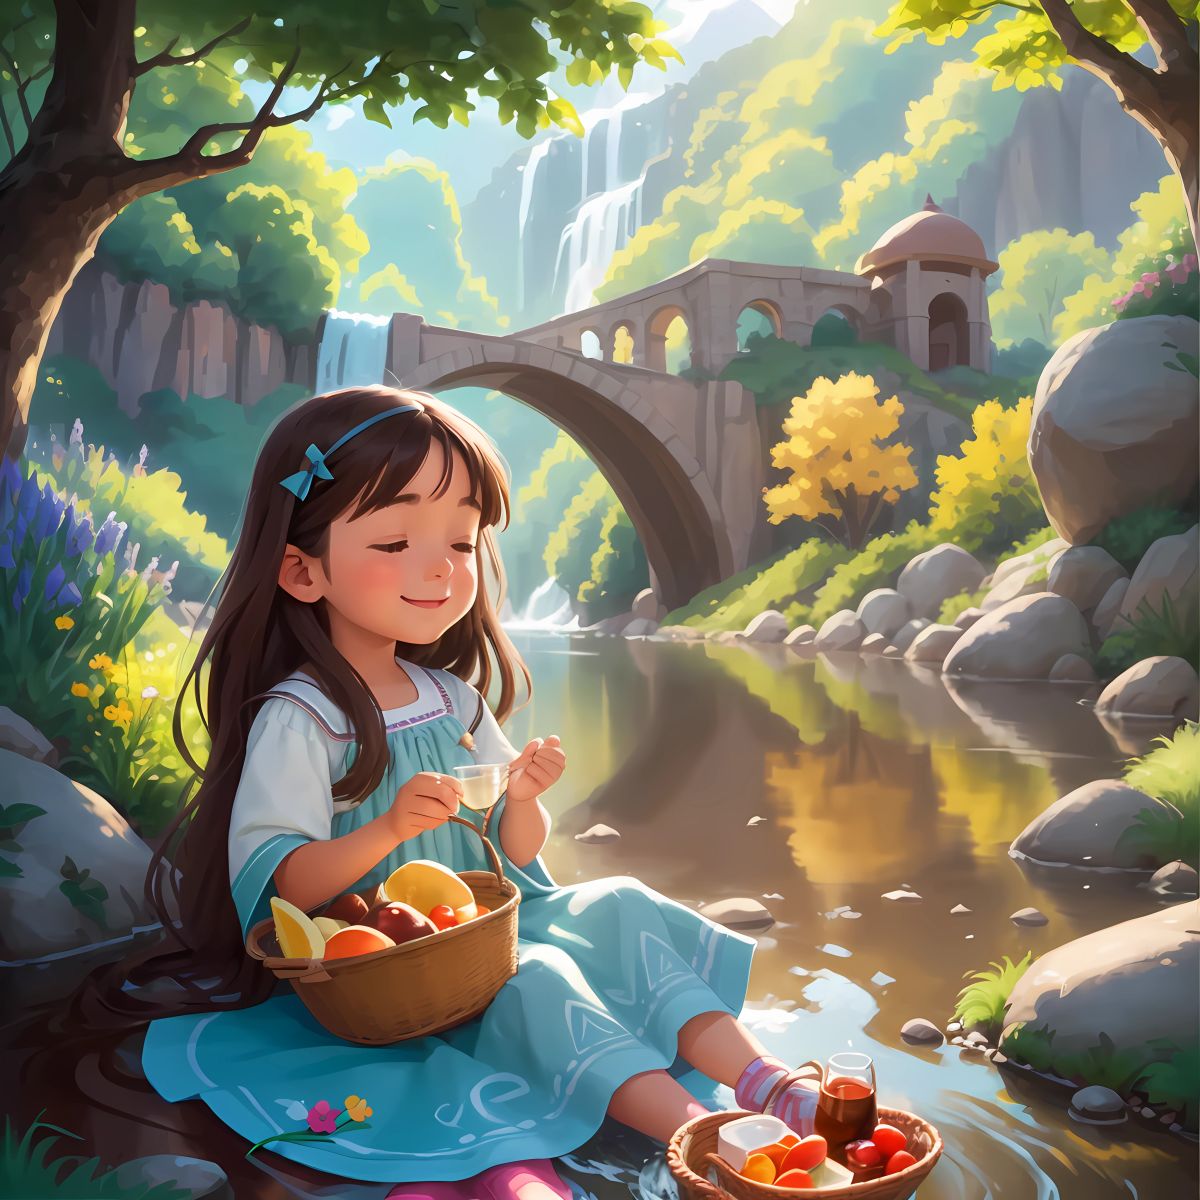 Picnic by the River: Julia and her newfound friends enjoying a delightful picnic by a tranquil river, surrounded by laughter, the soothing sound of flowing water, and a cozy blanket.